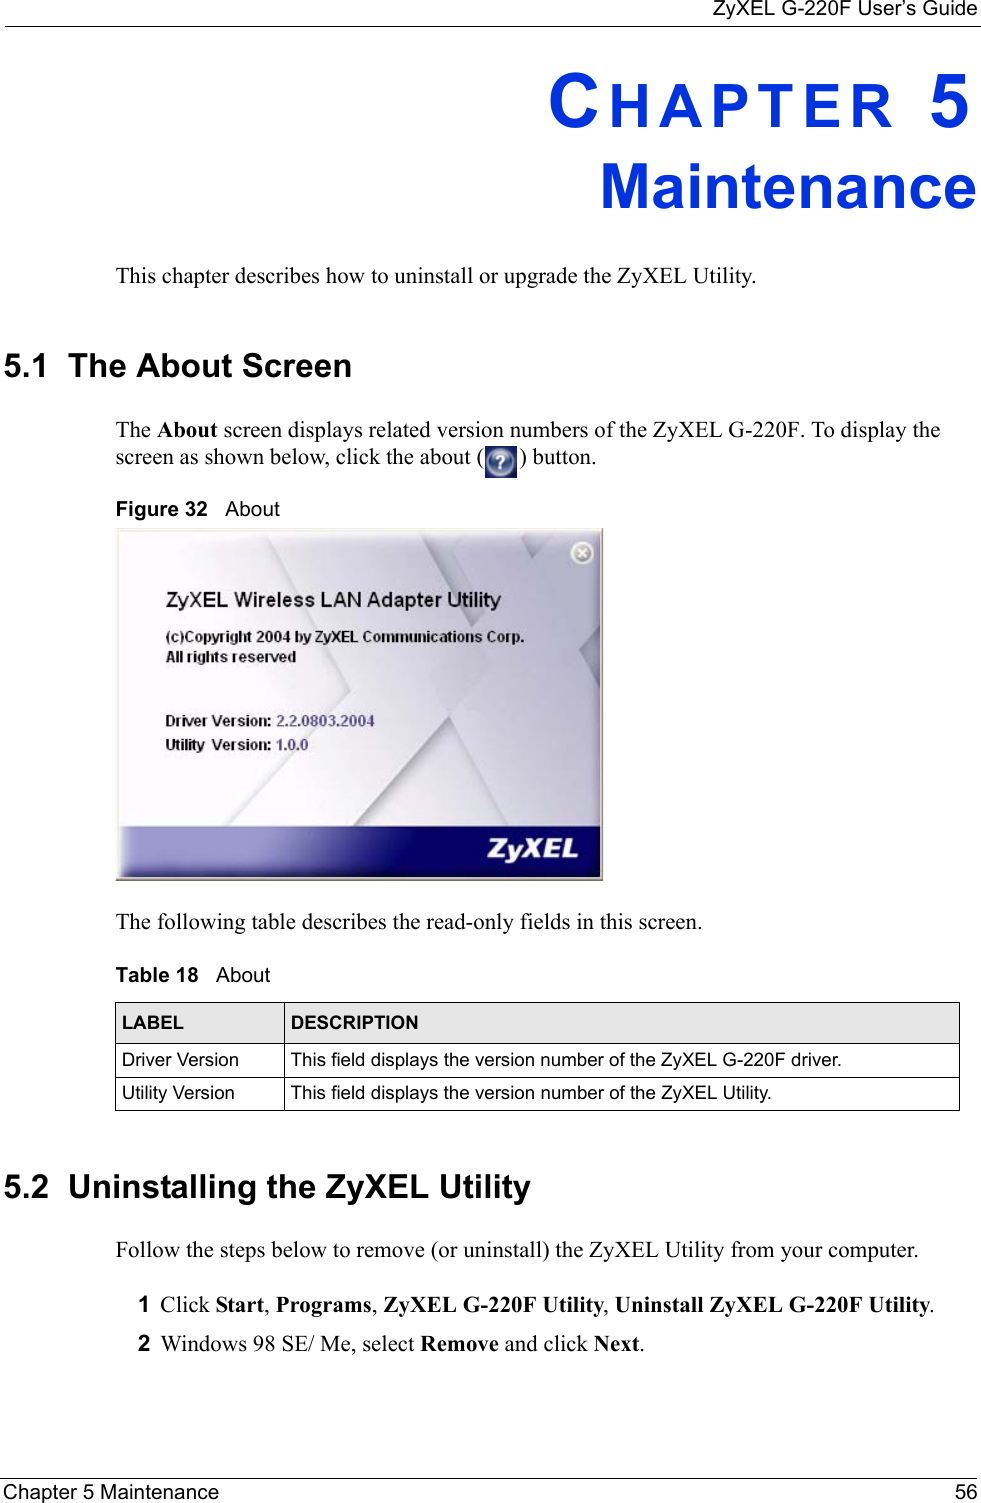 ZyXEL G-220F User’s GuideChapter 5 Maintenance 56CHAPTER 5MaintenanceThis chapter describes how to uninstall or upgrade the ZyXEL Utility.5.1  The About Screen The About screen displays related version numbers of the ZyXEL G-220F. To display the screen as shown below, click the about ( ) button.Figure 32   About The following table describes the read-only fields in this screen. 5.2  Uninstalling the ZyXEL Utility Follow the steps below to remove (or uninstall) the ZyXEL Utility from your computer.1Click Start, Programs, ZyXEL G-220F Utility, Uninstall ZyXEL G-220F Utility.2Windows 98 SE/ Me, select Remove and click Next. Table 18   About LABEL DESCRIPTIONDriver Version This field displays the version number of the ZyXEL G-220F driver.Utility Version This field displays the version number of the ZyXEL Utility.